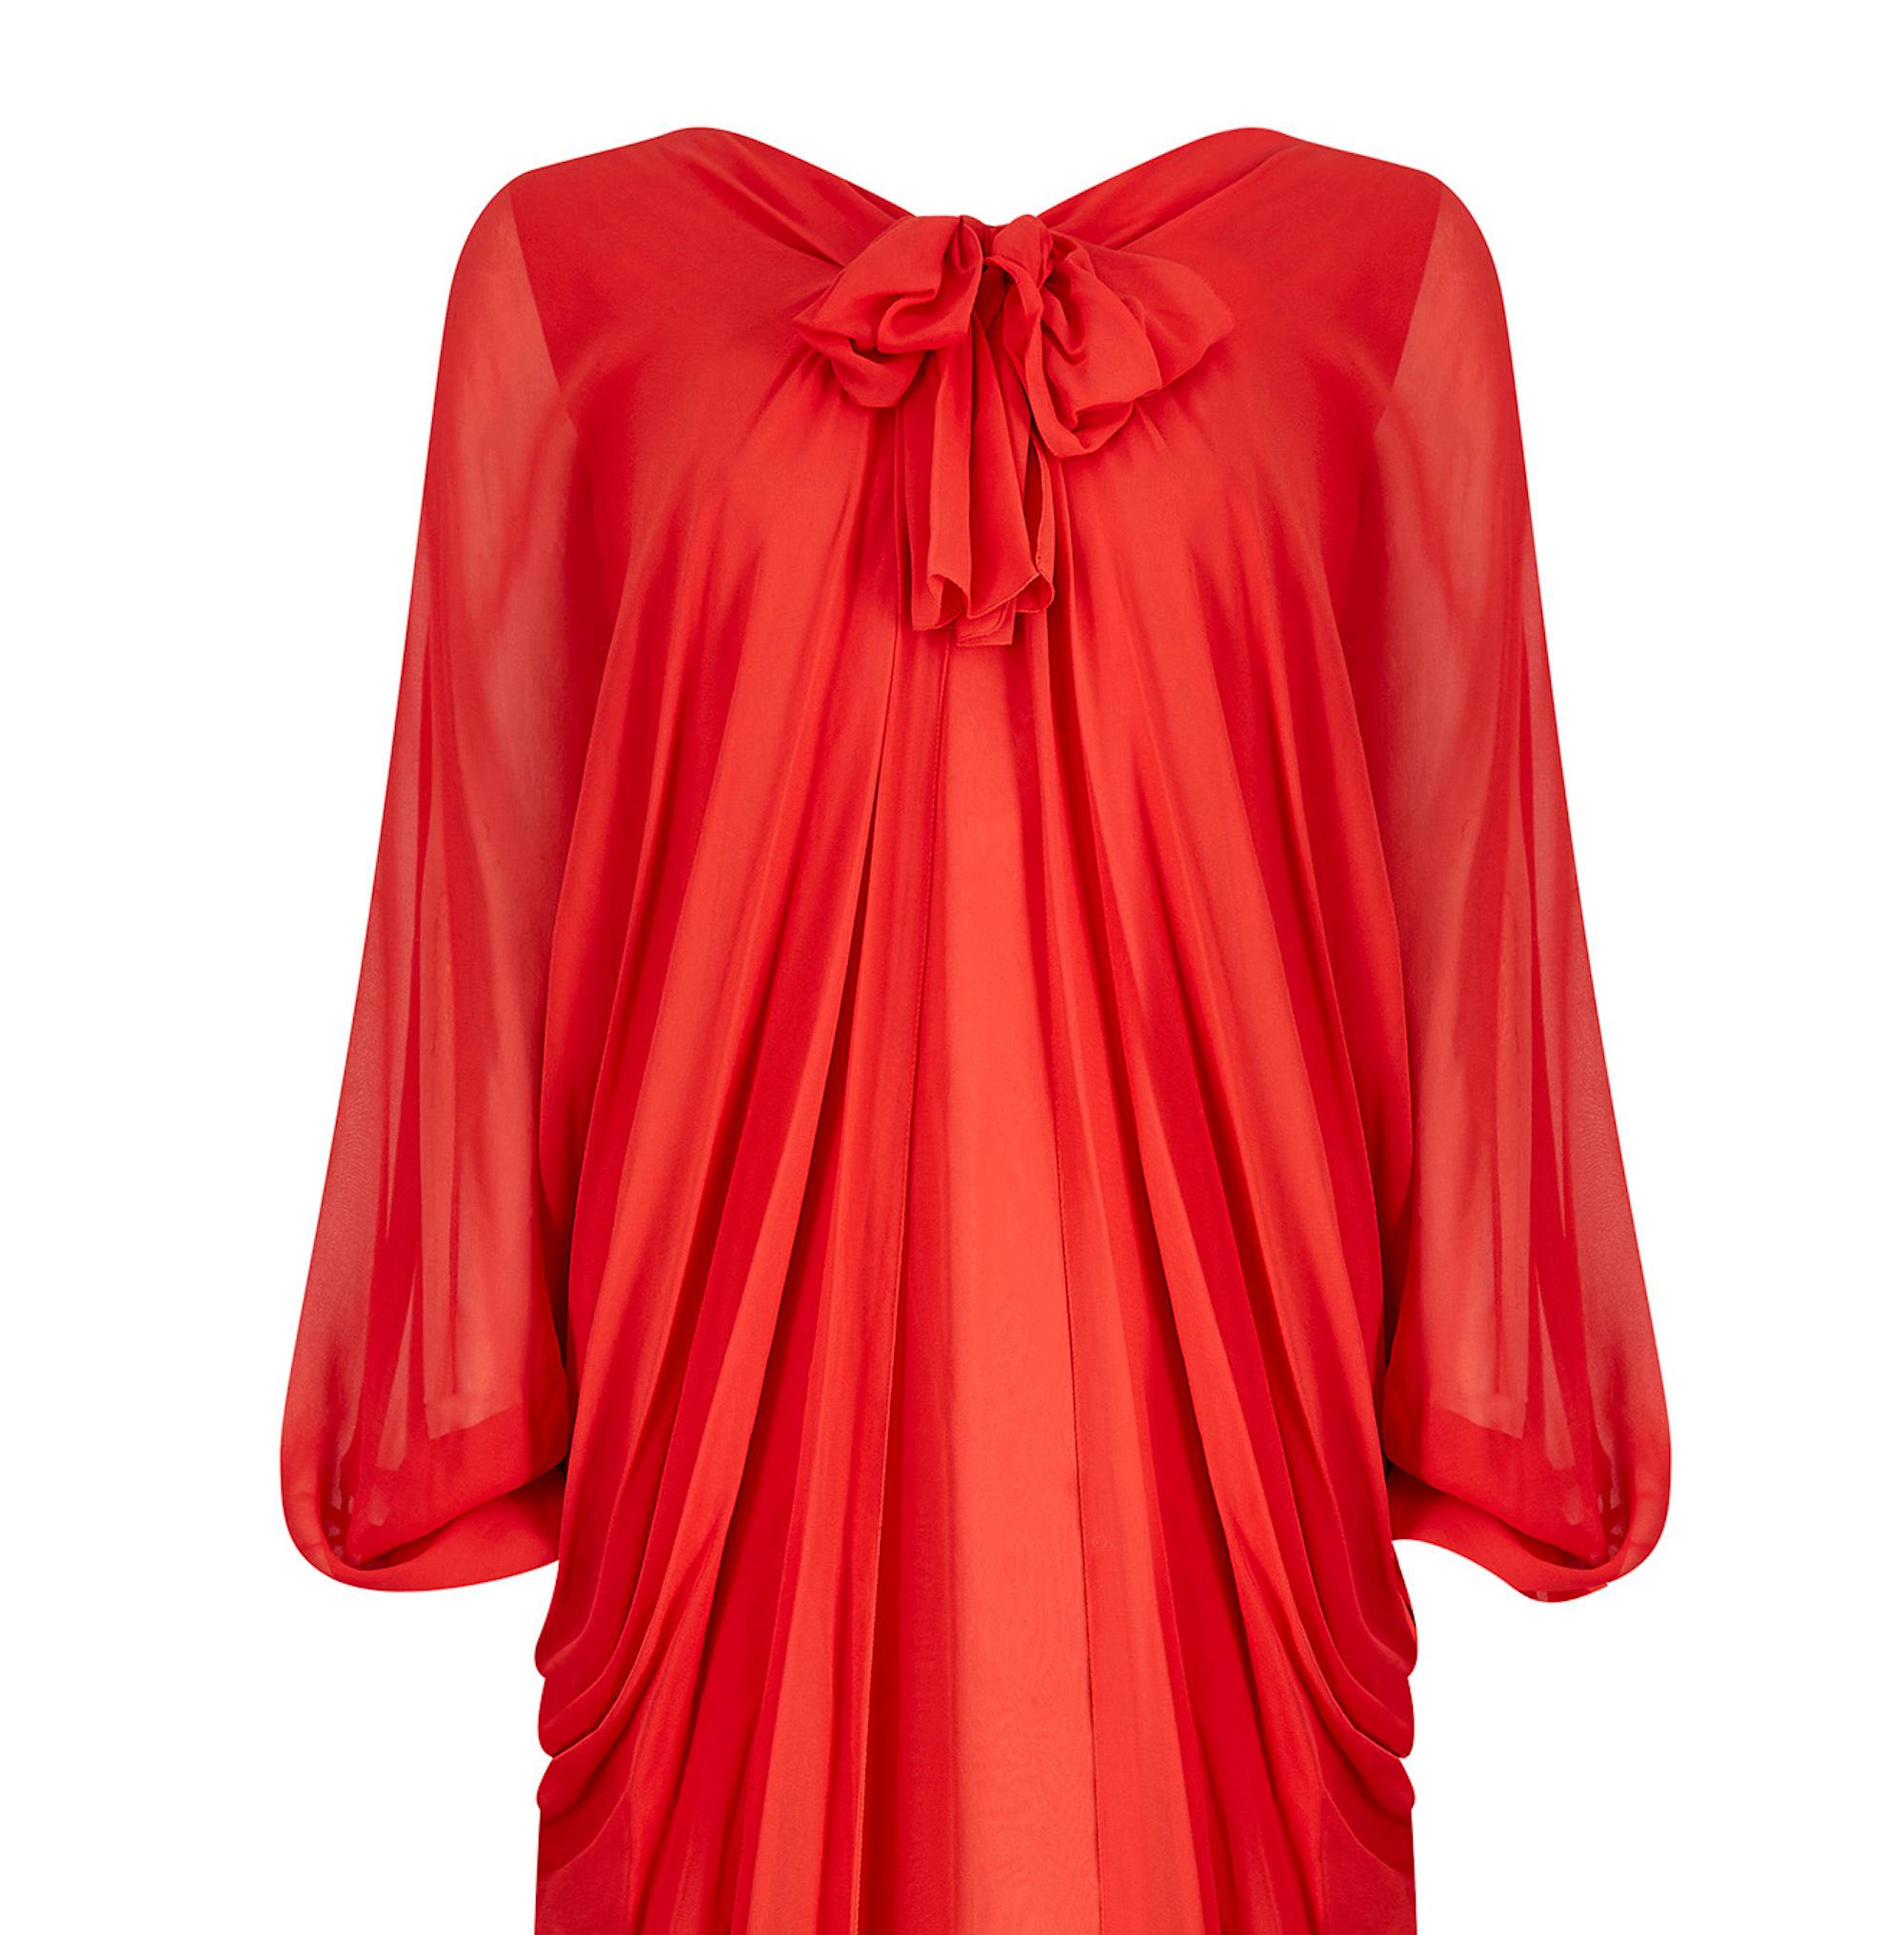 Women's 1970s Christian Dior Demi Couture Red Silk Chiffon Dress For Sale